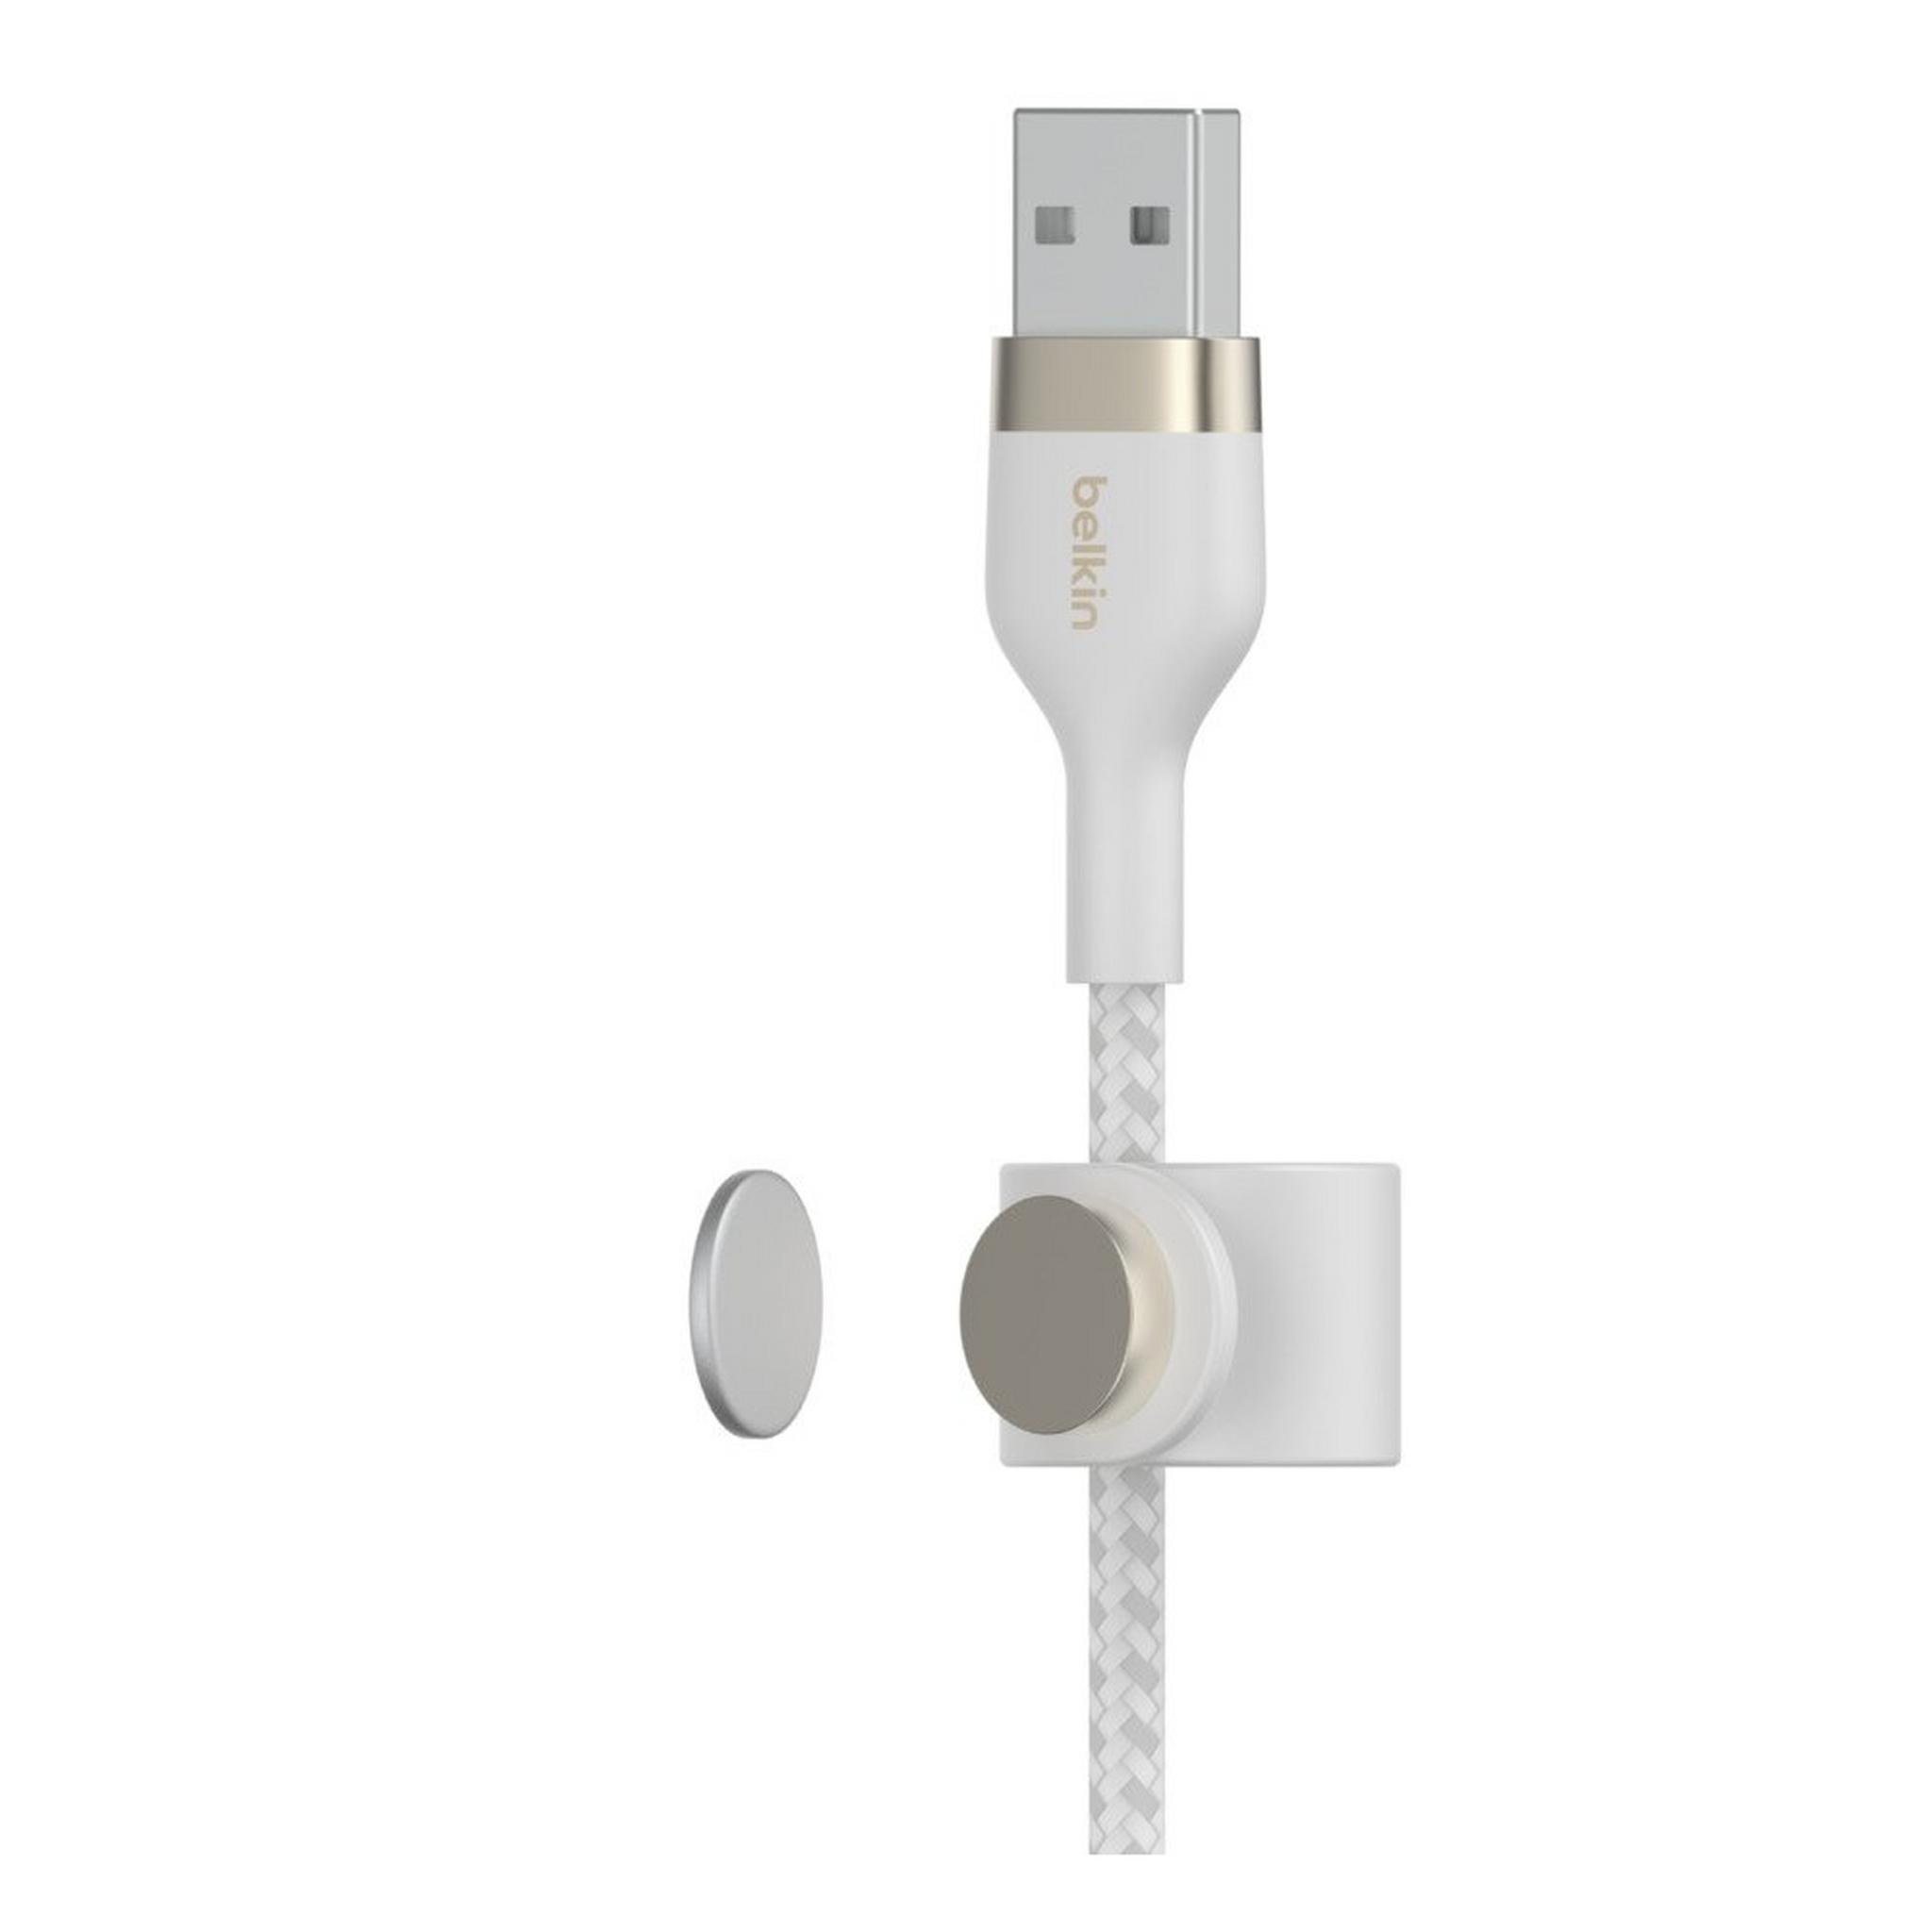 Belkin USB A to Lightning Cable 3M - White